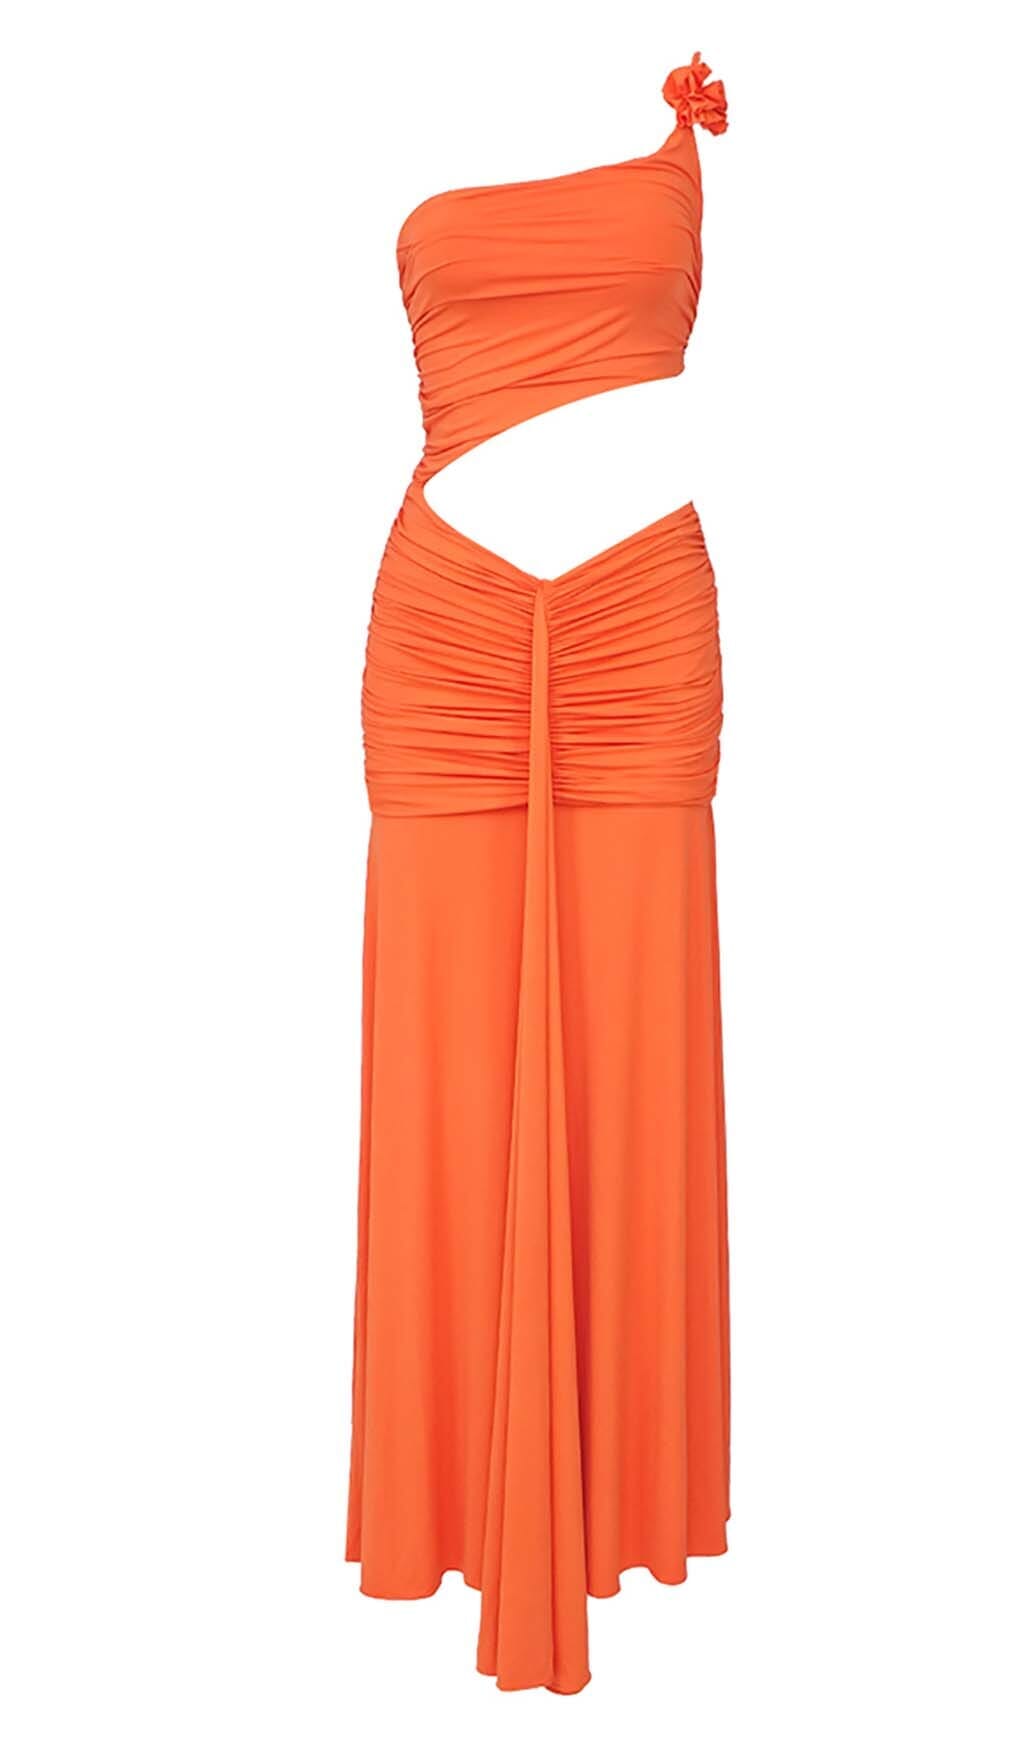 ASYMMETRIC RUCHED JERSEY MAXI DRESS IN ORANGE